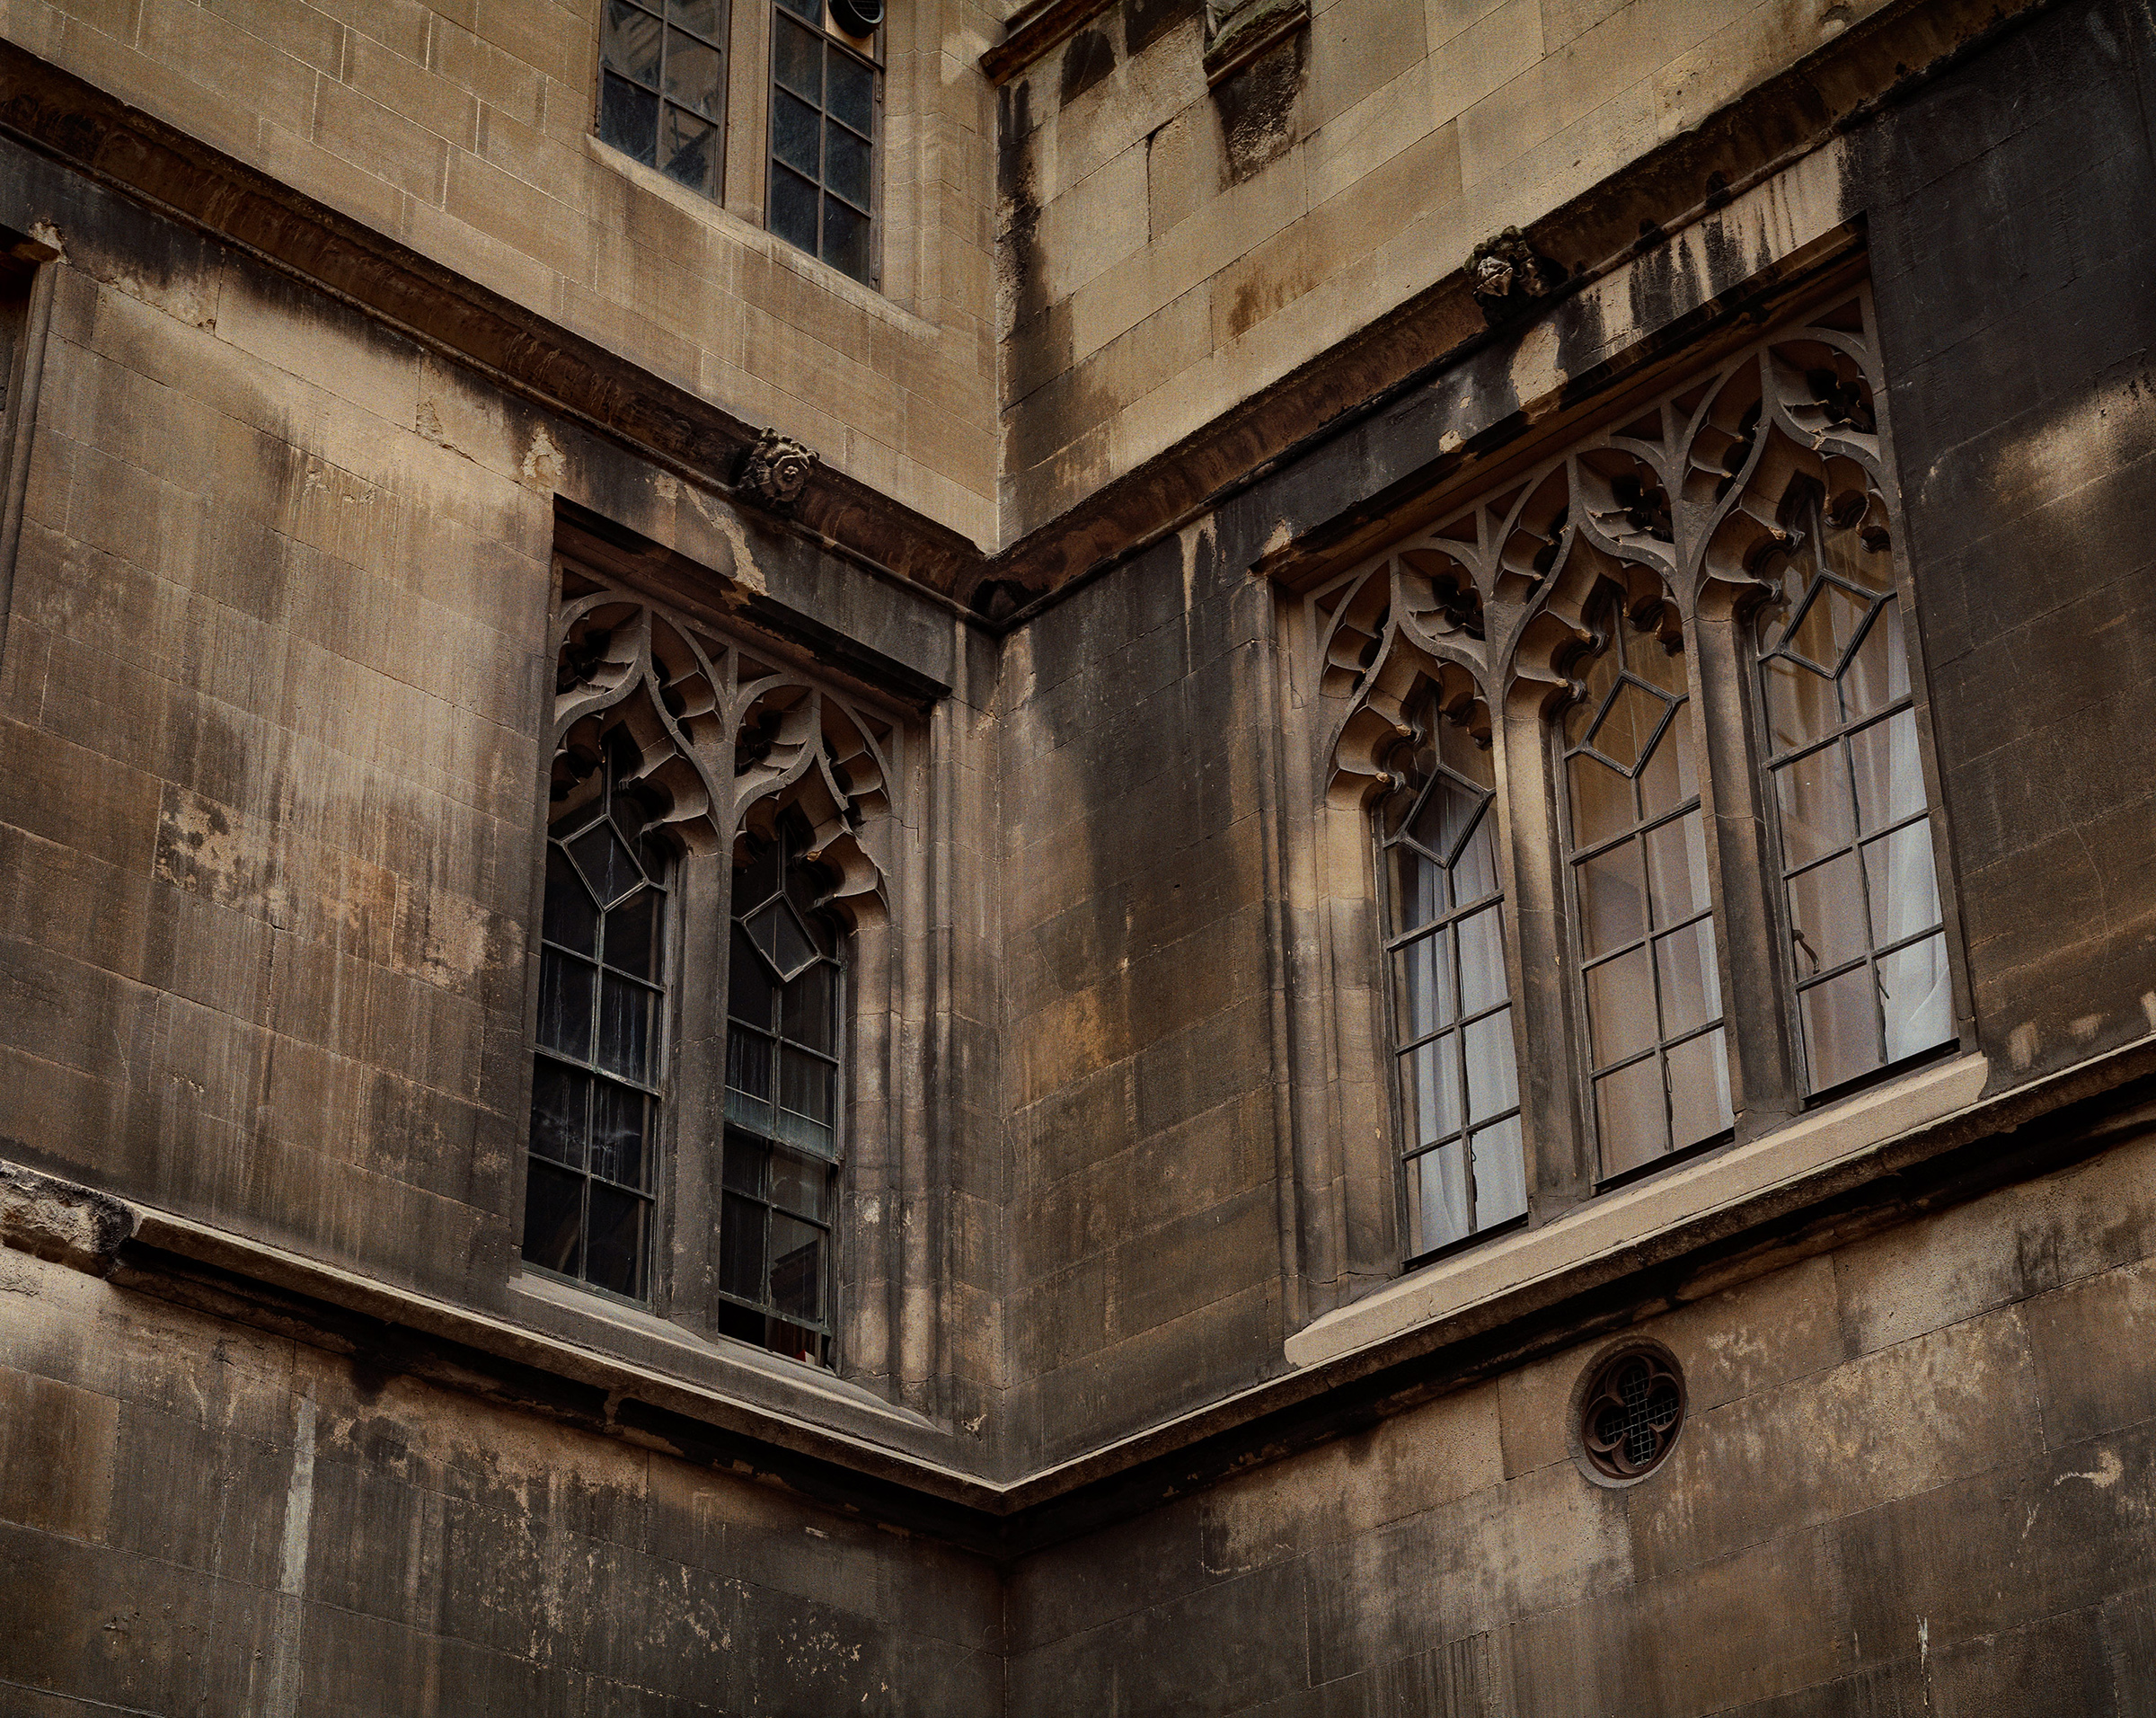 Blocks of masonry missing (bottom left), and blackened brickwork in the Palace of Westminster, London, on May 30, 2019. (Ben Quinton for TIME)